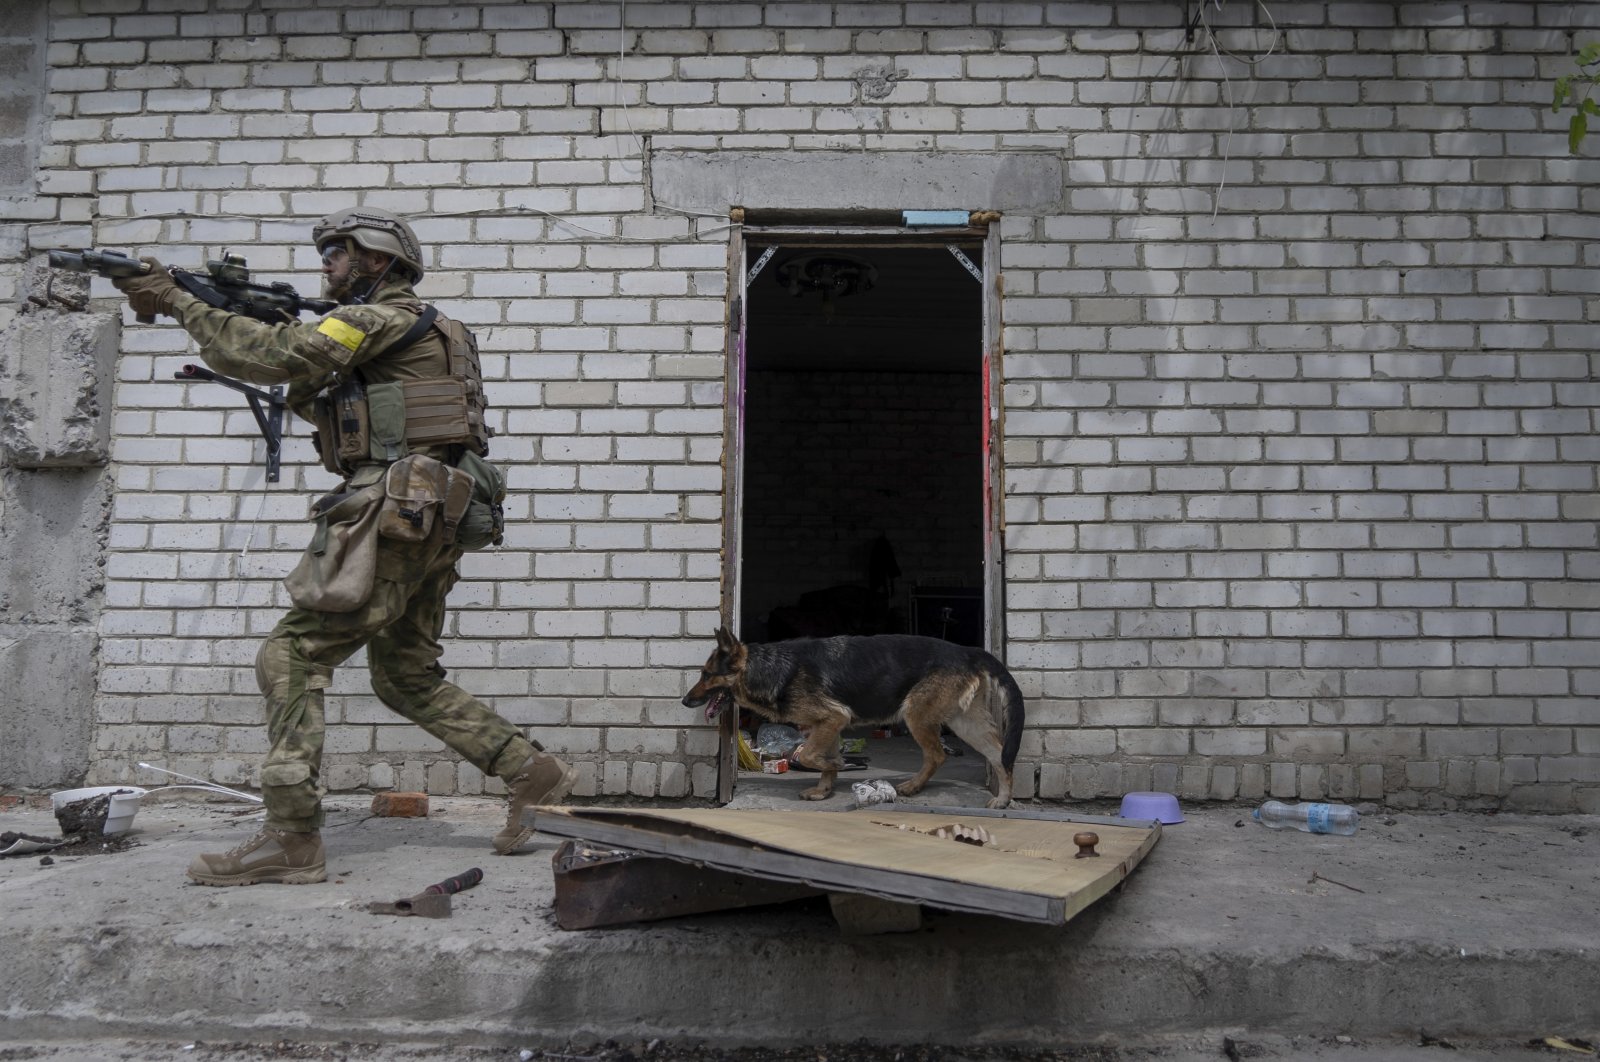 A Ukrainian officer patrols during a reconnaissance mission in a recently retaken village on the outskirts of Kharkiv, east Ukraine, May 14, 2022. (AP Photo)